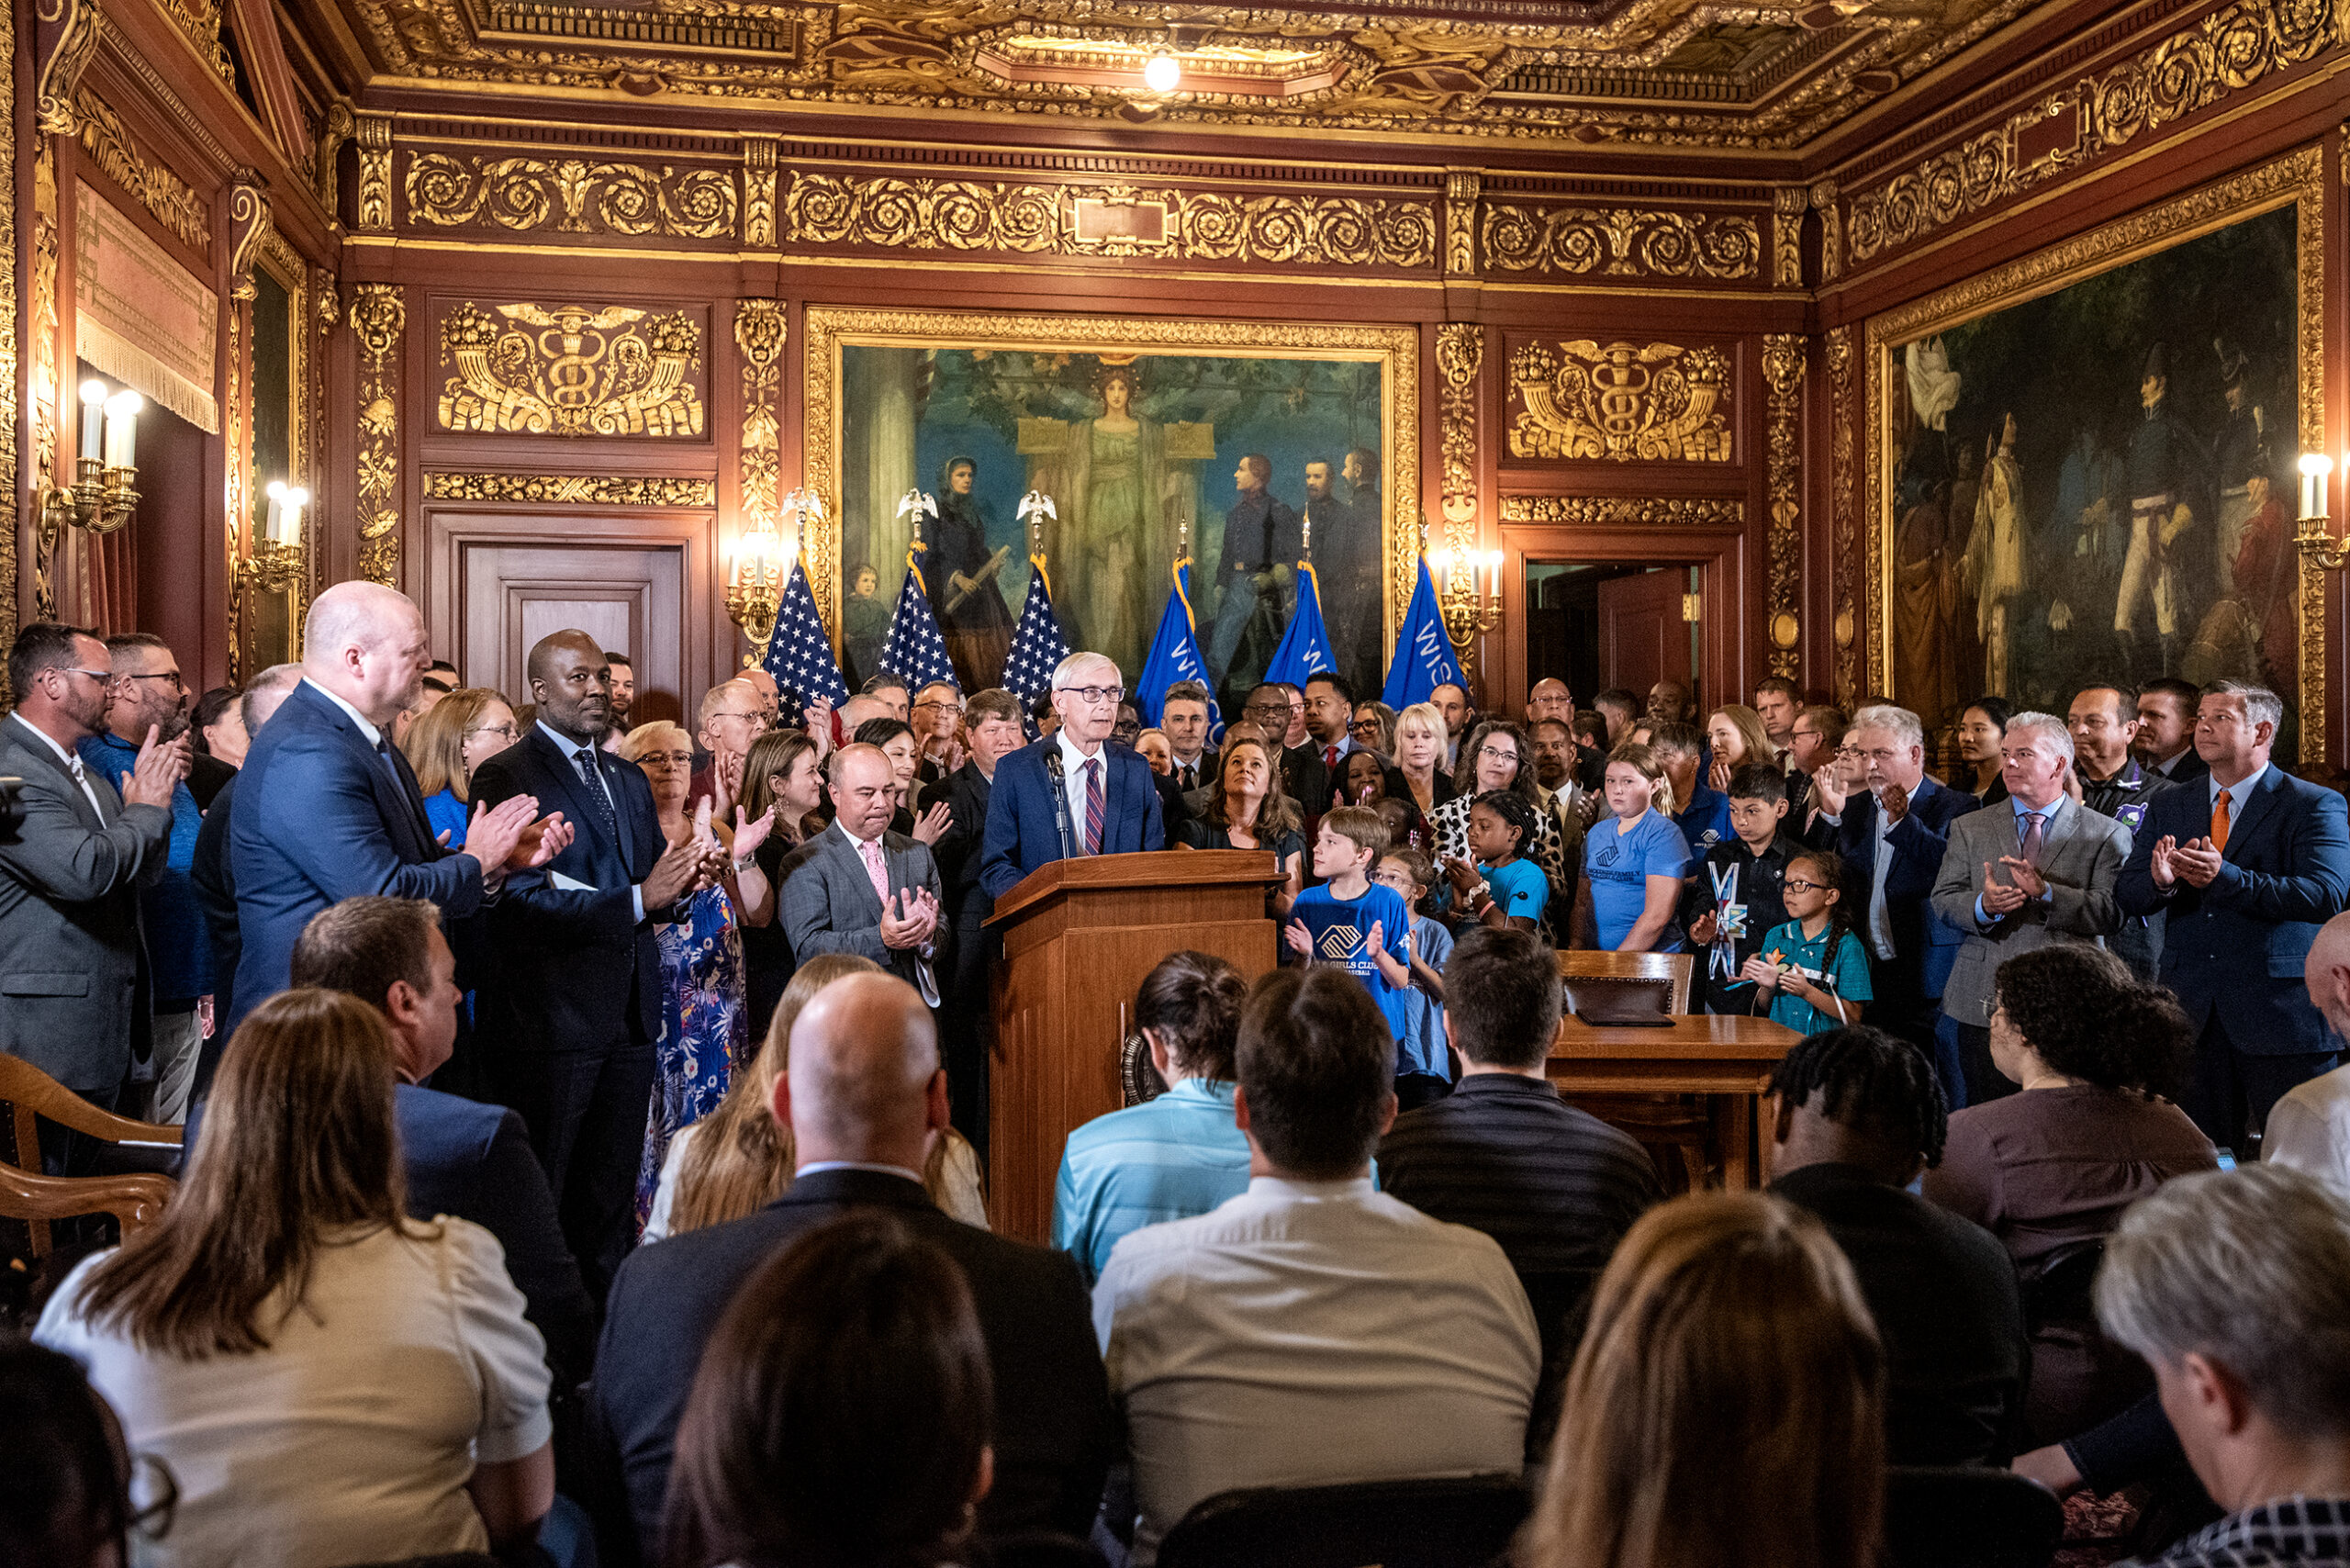 A room in the Wisconsin State Capitol is filled with officials standing behind Gov. Evers speaking at a podium.